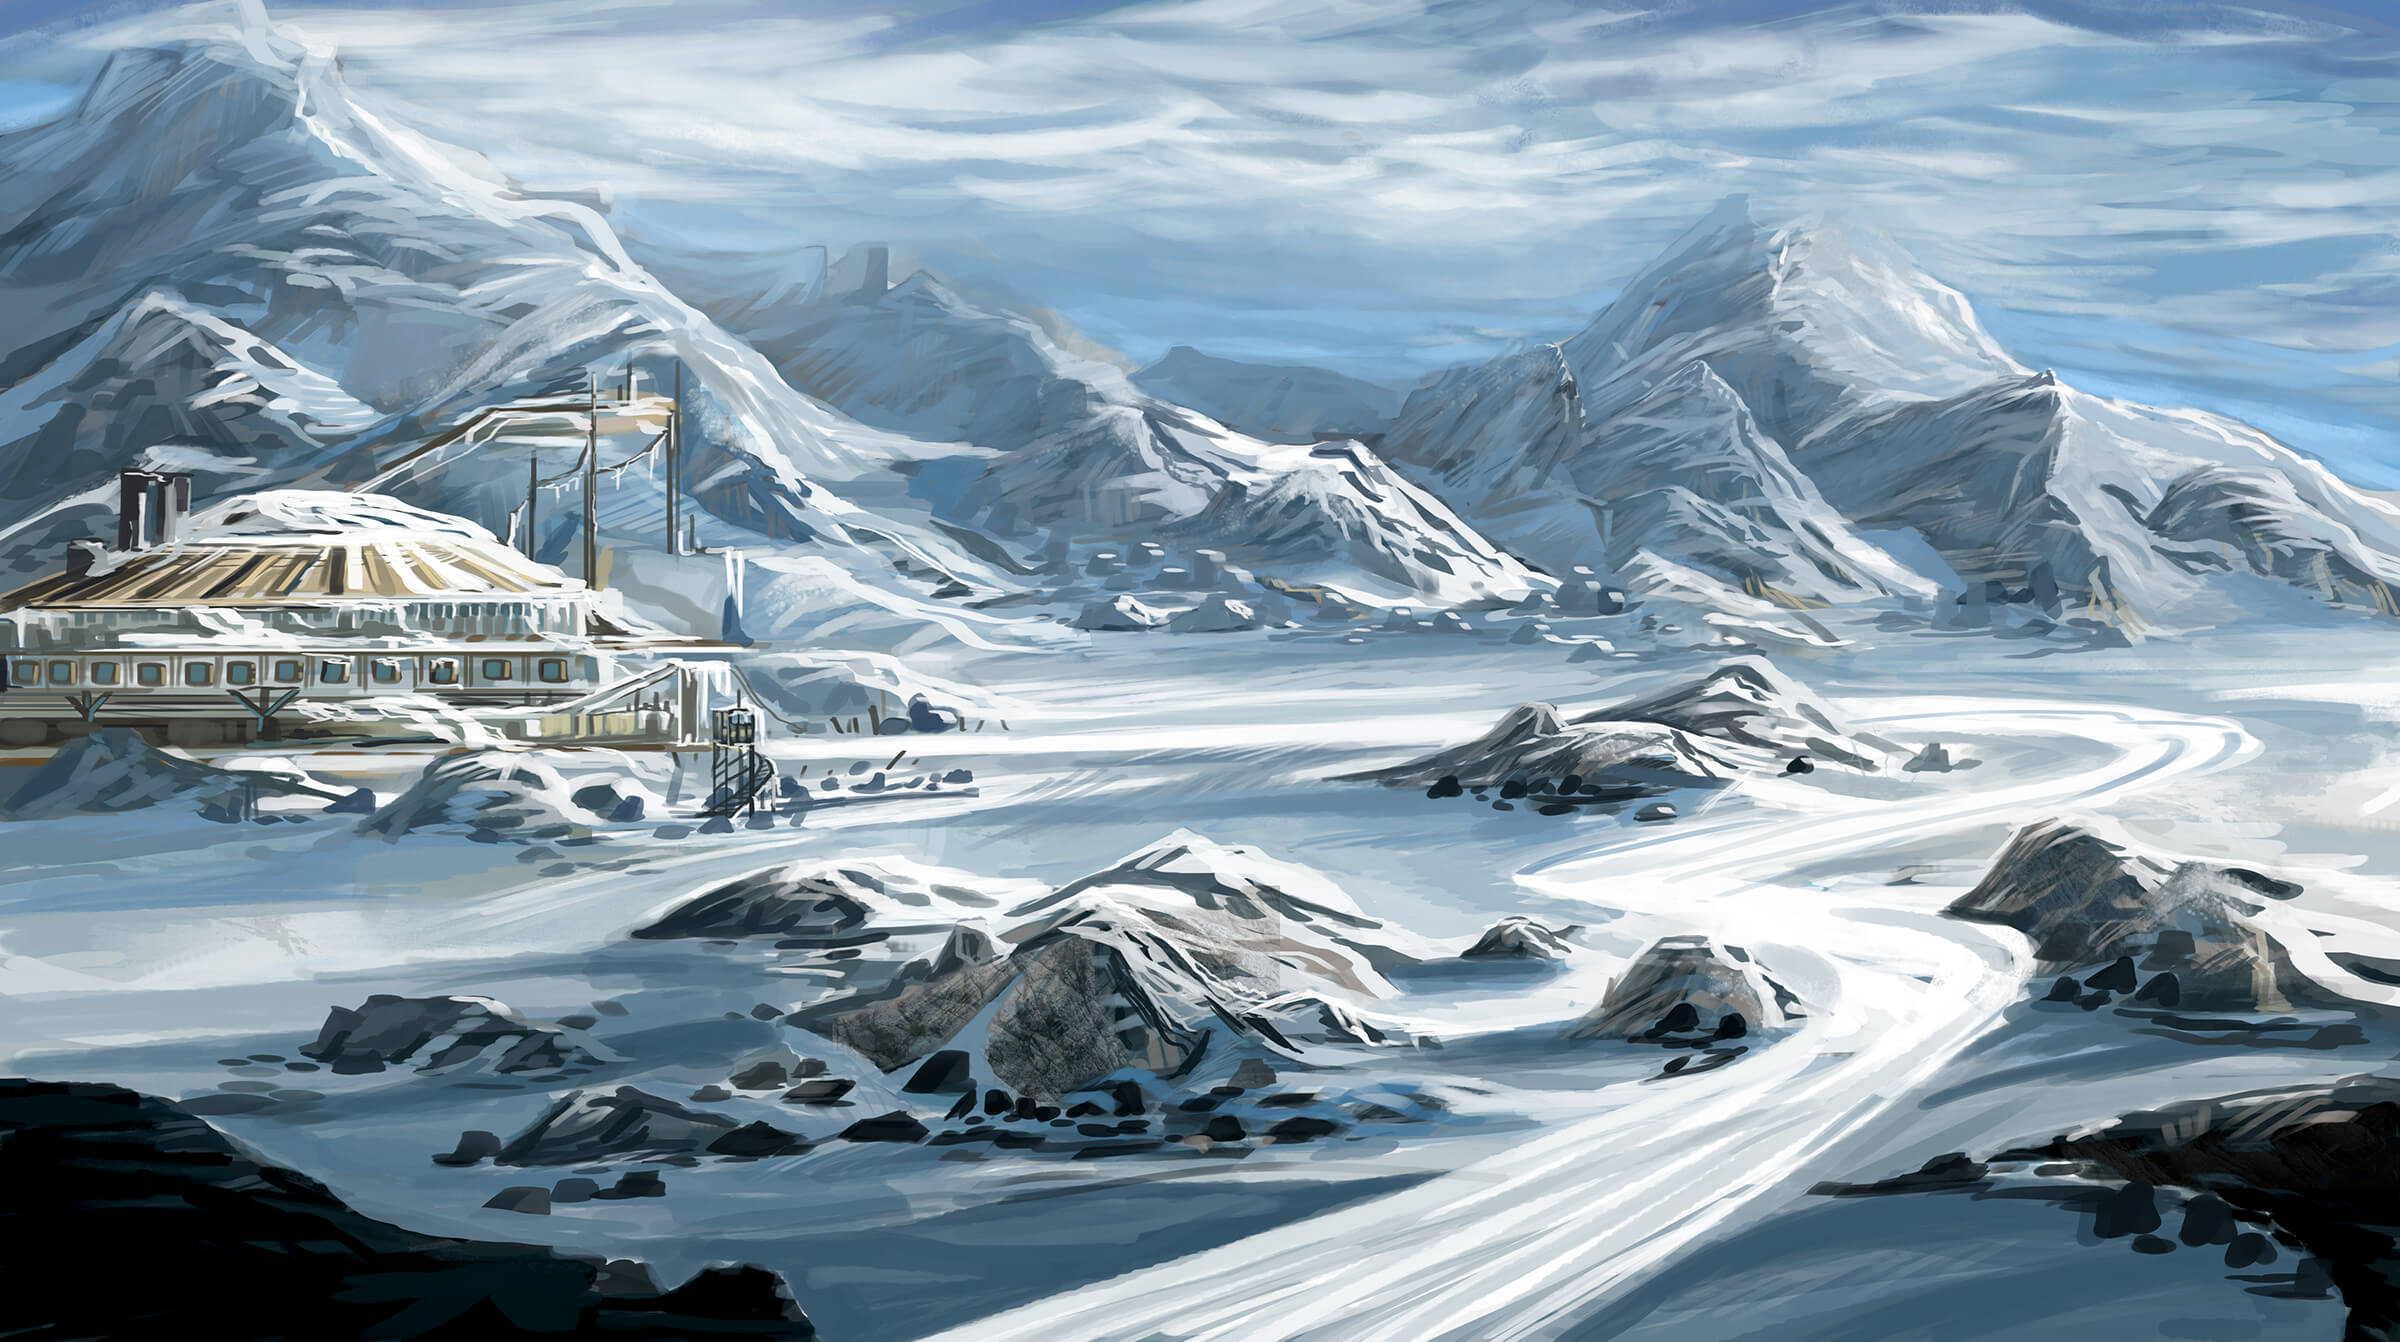 A remote research station and campsite at the base of an icy mountain range, seemingly devoid of activity.